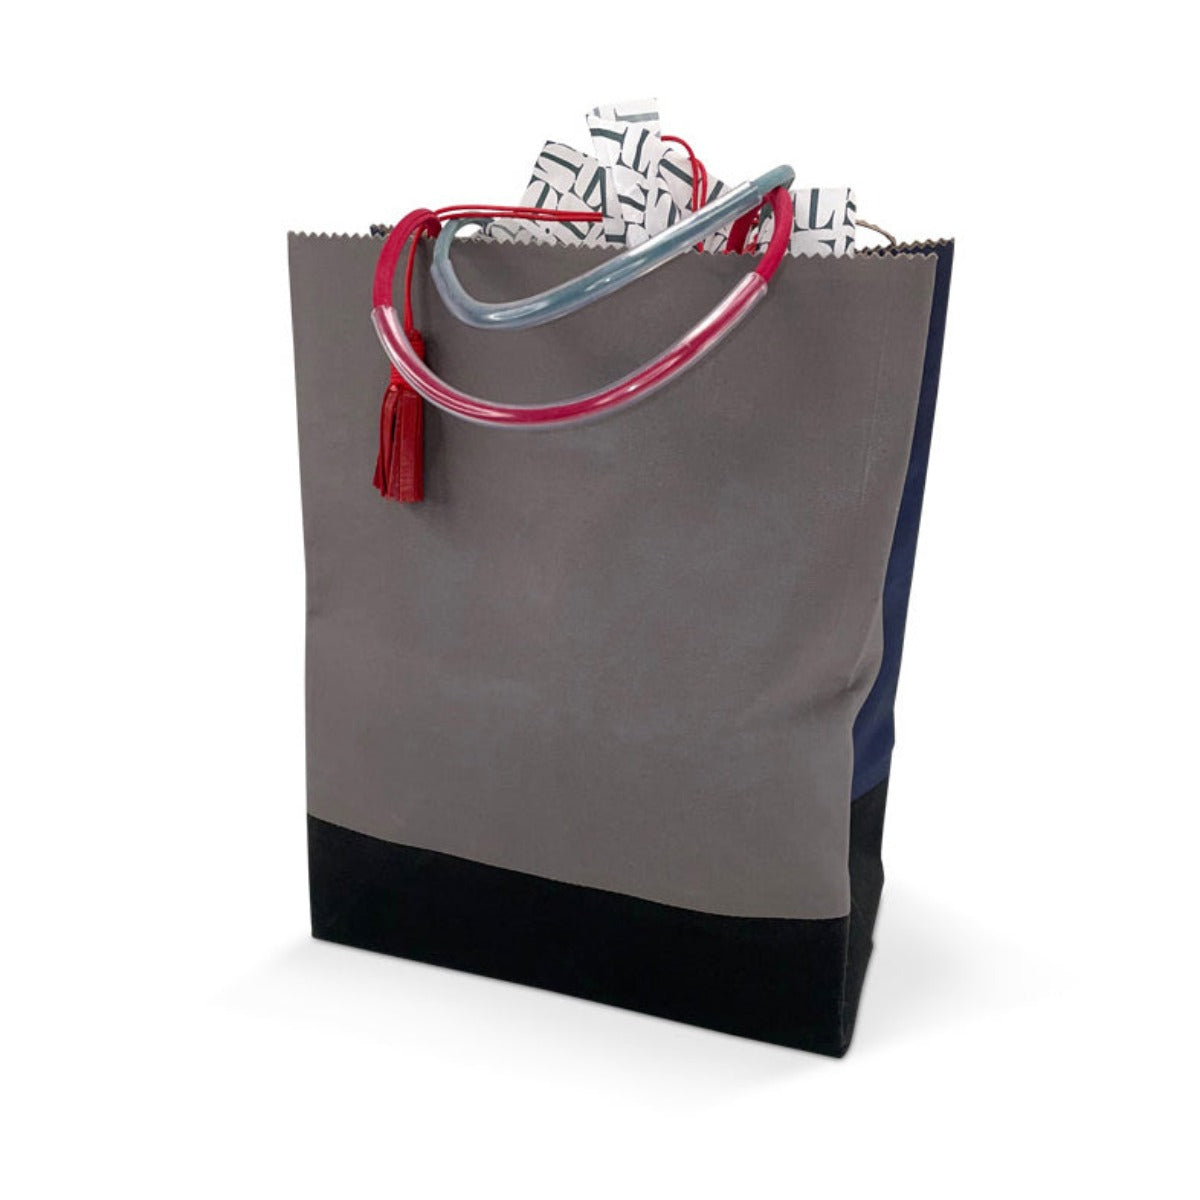 Munari Waxed Cotton Marche Tote by Brave Brown Bag